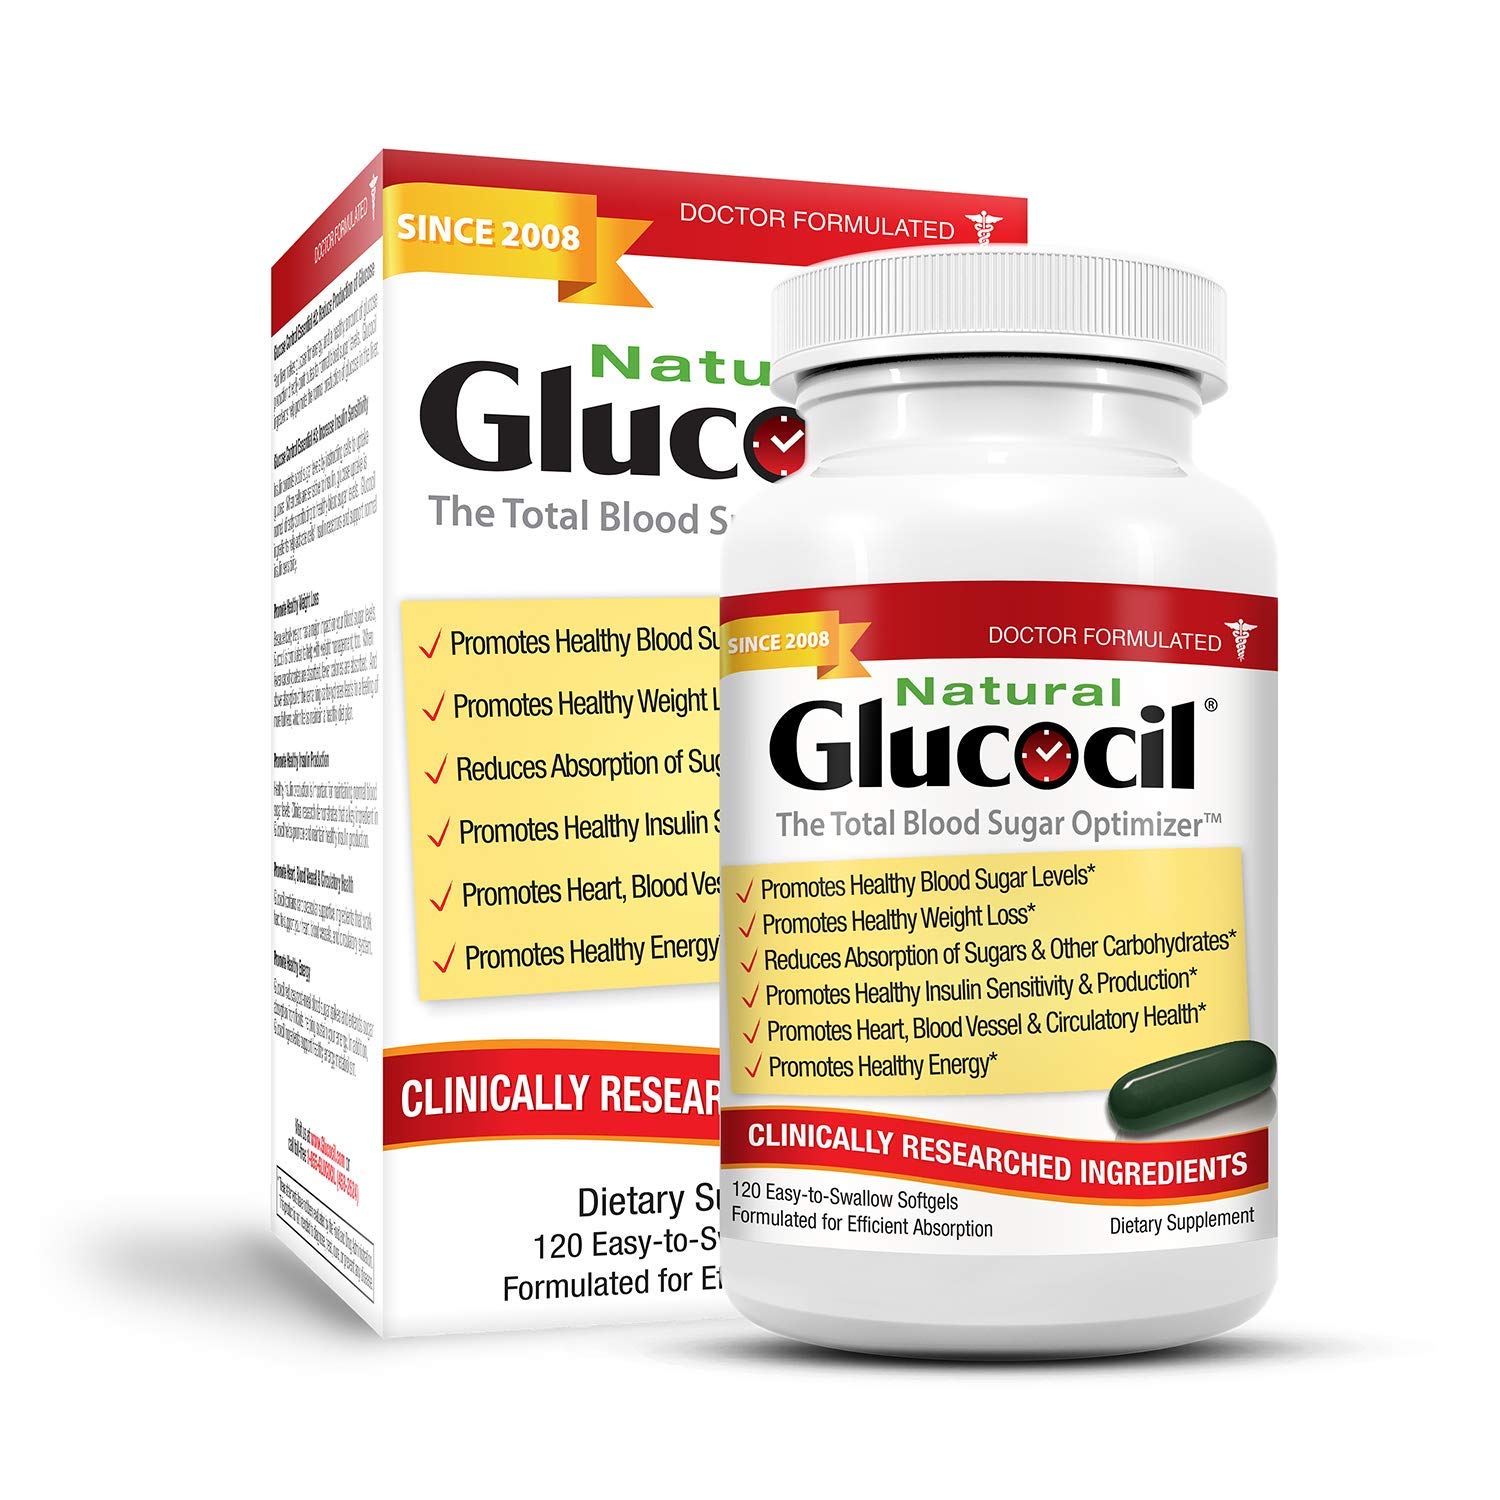 Glucocil - Promotes Normal Blood Sugar Levels Naturally